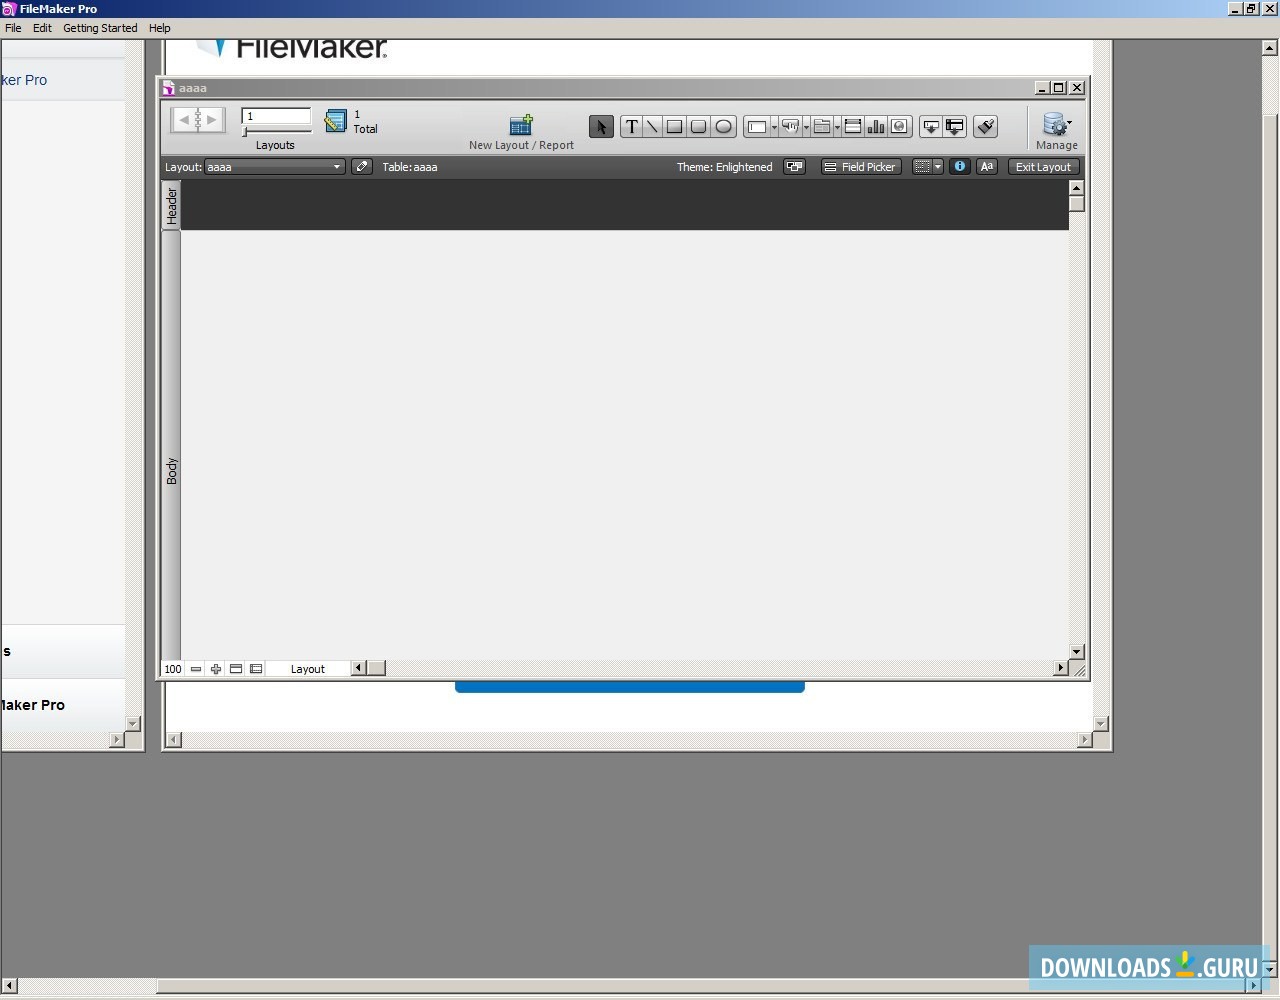 filemaker app for android